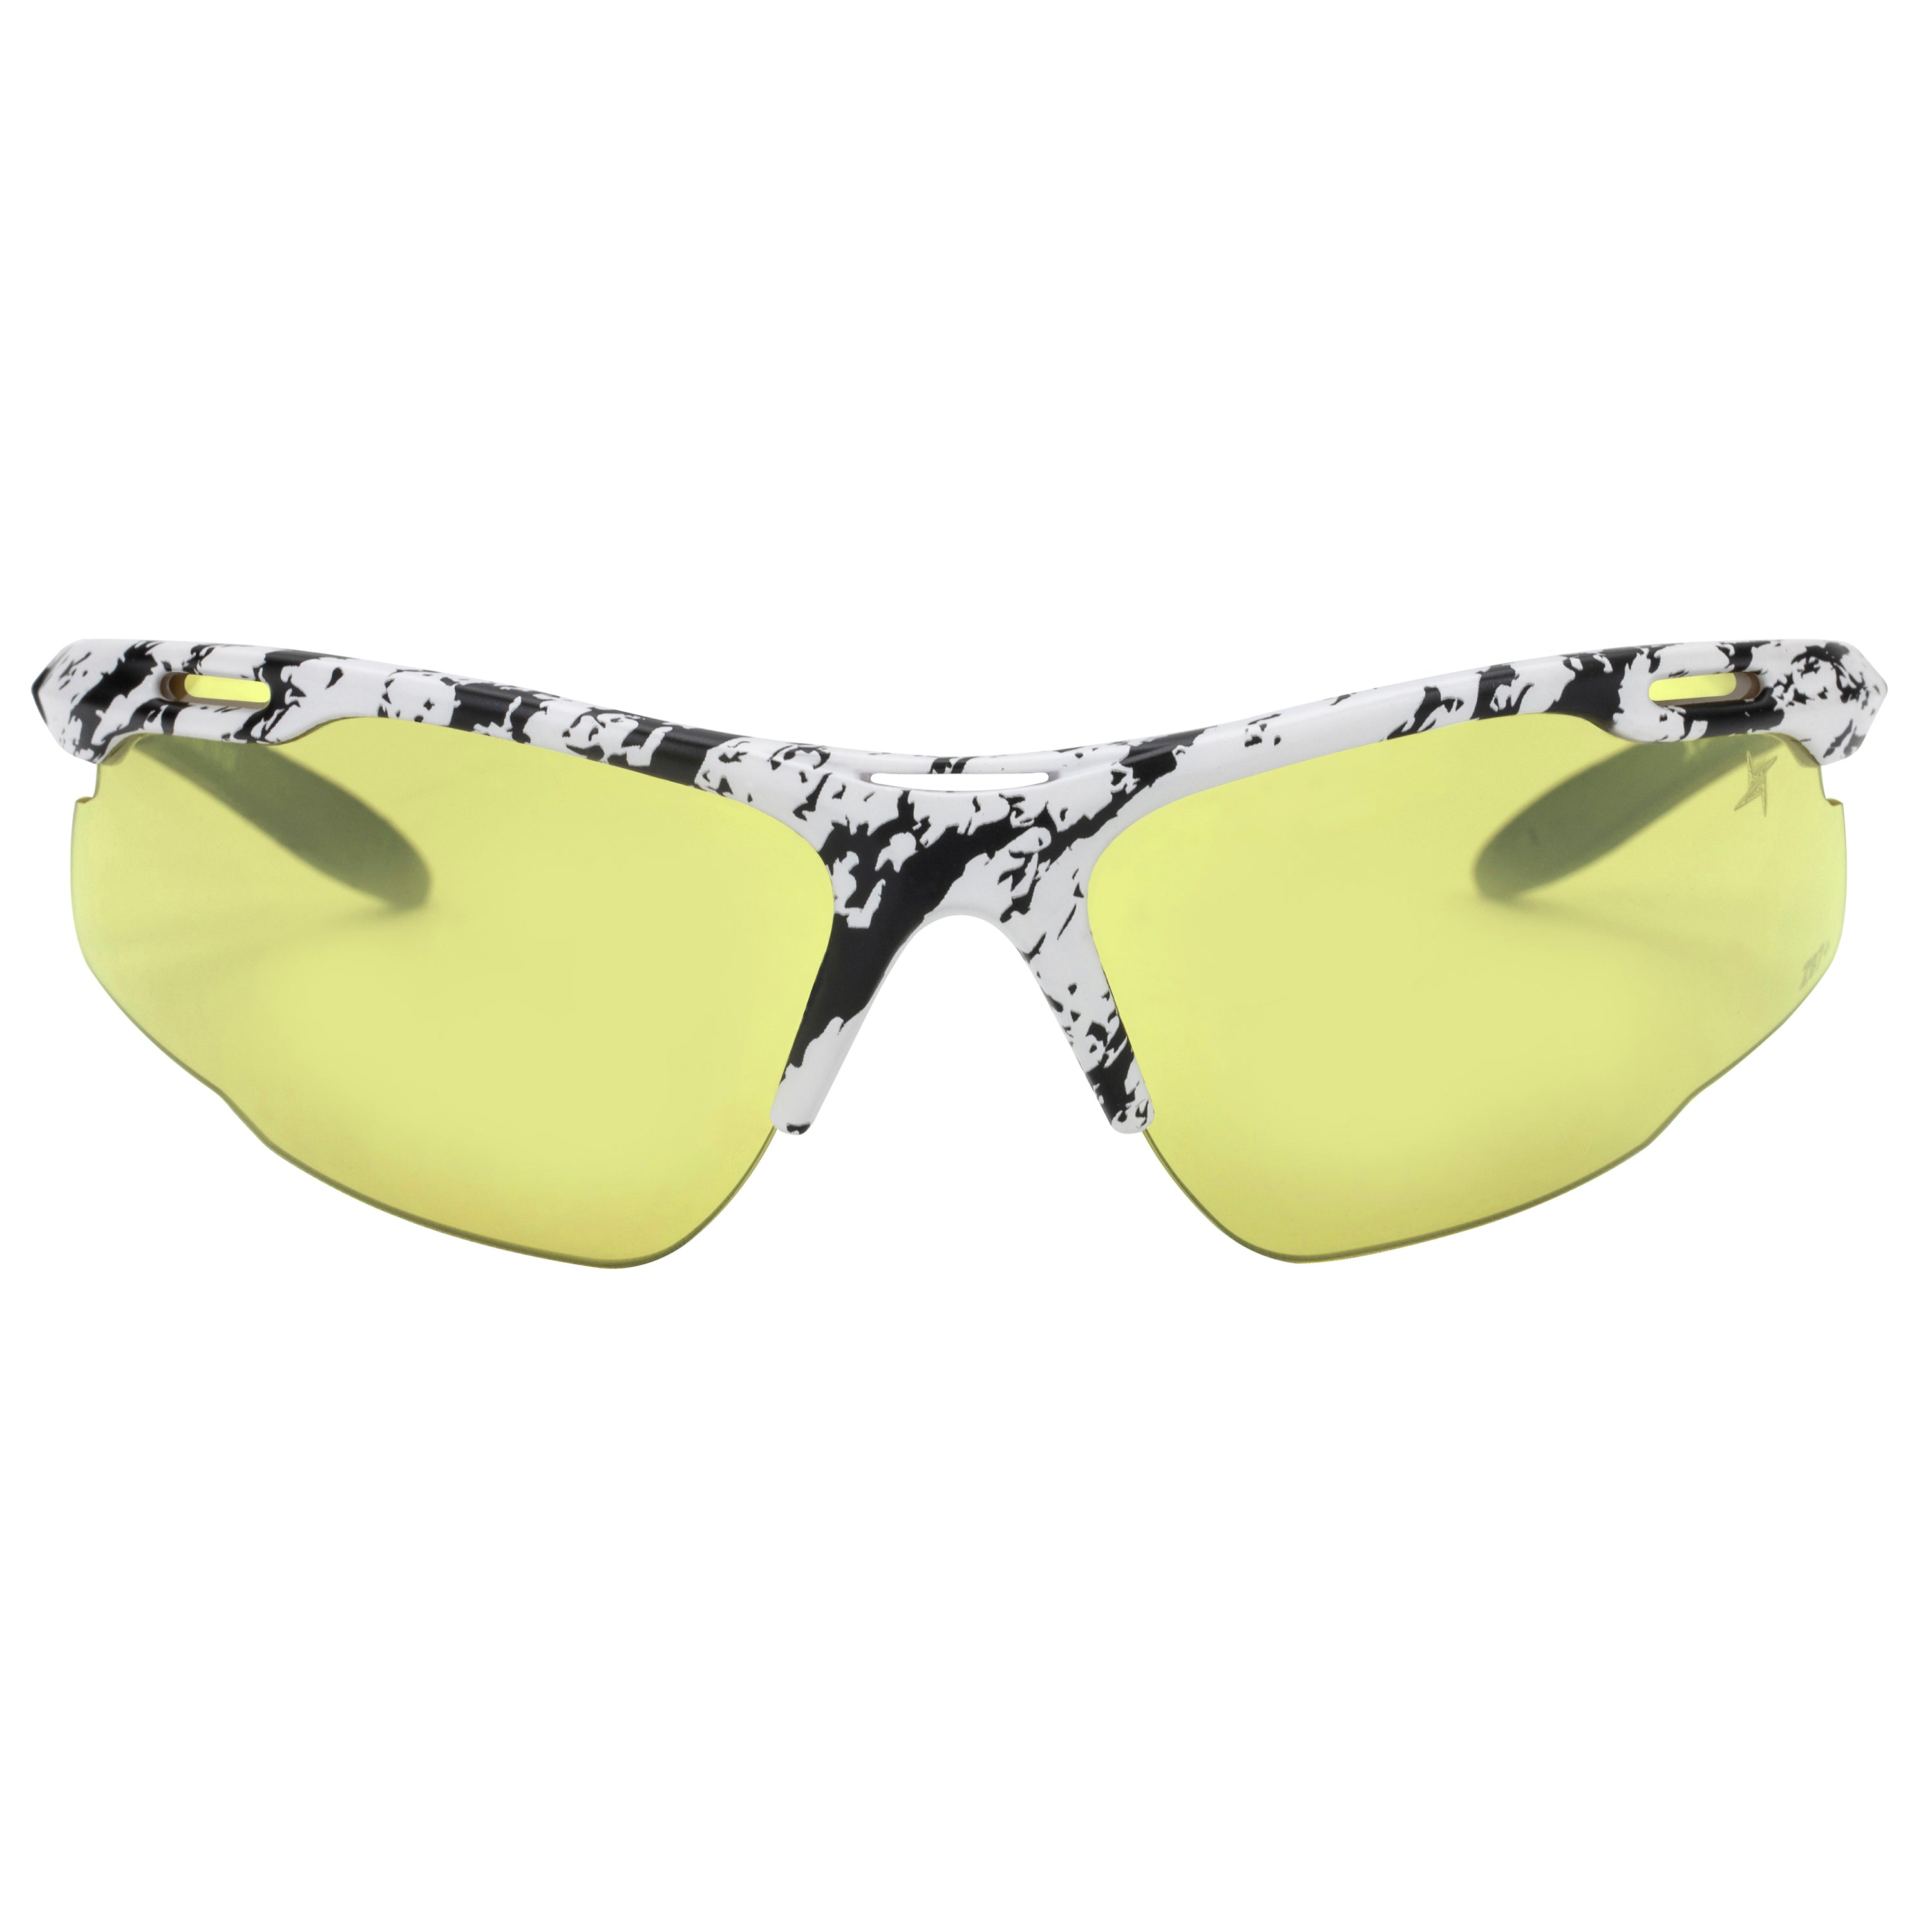 Yellow to Grey Photochromic Lens with Flash Mirror Coating Half Frame Wrap Around Sport Safety Sunglasses.